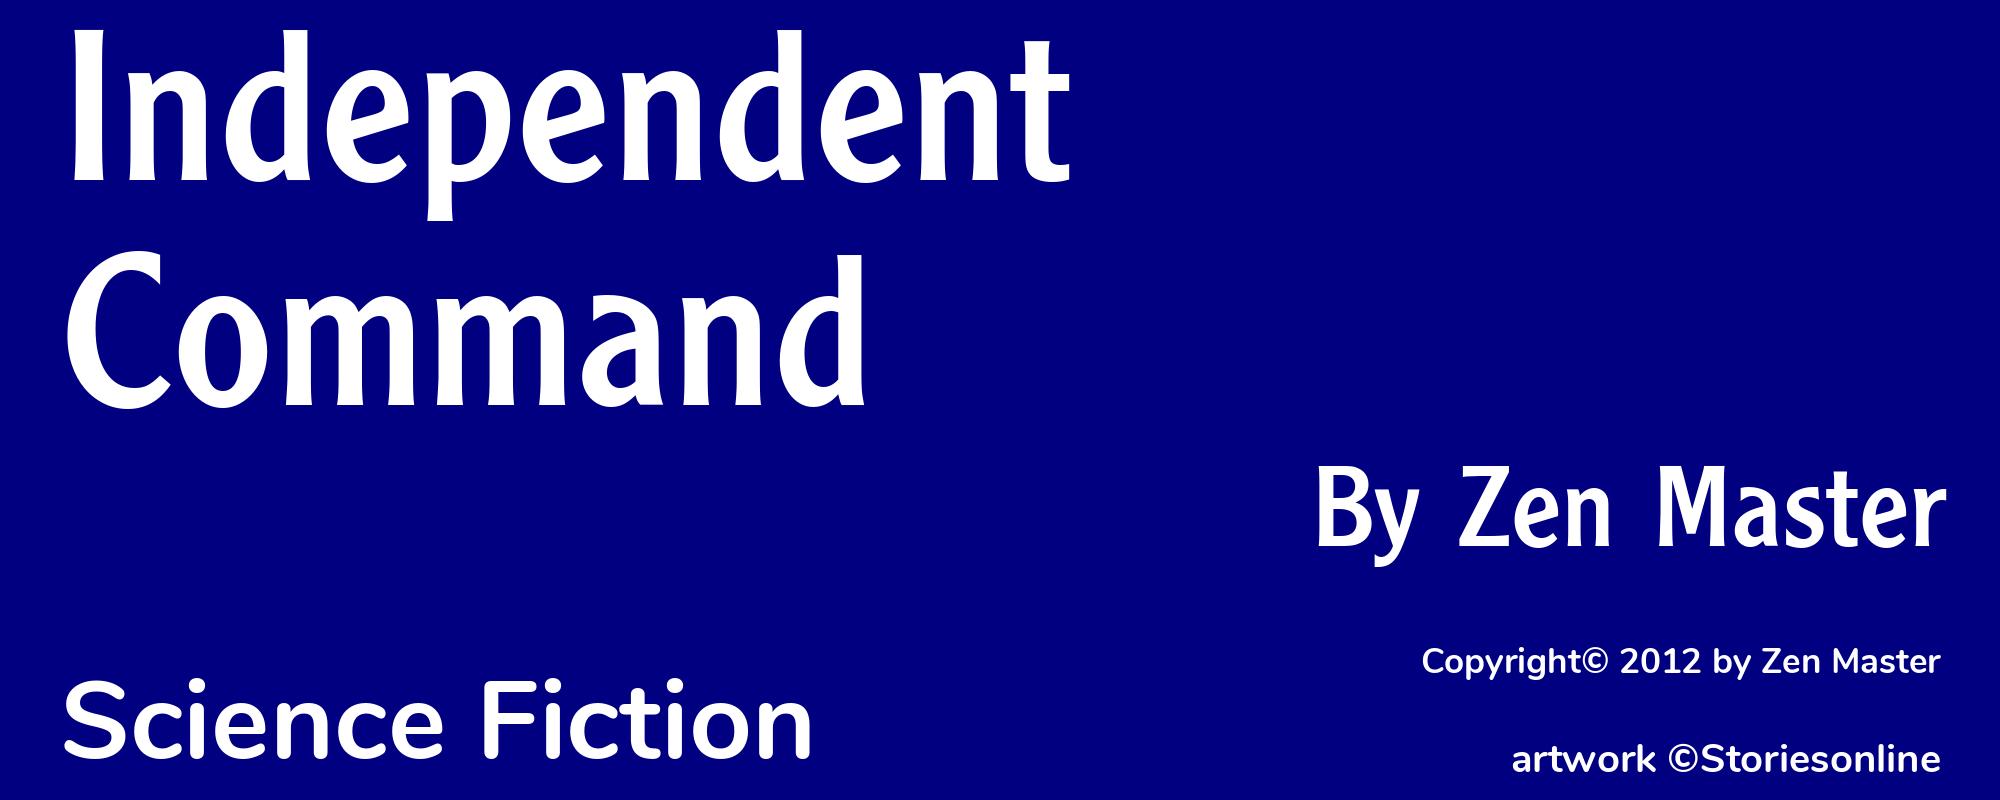 Independent Command - Cover